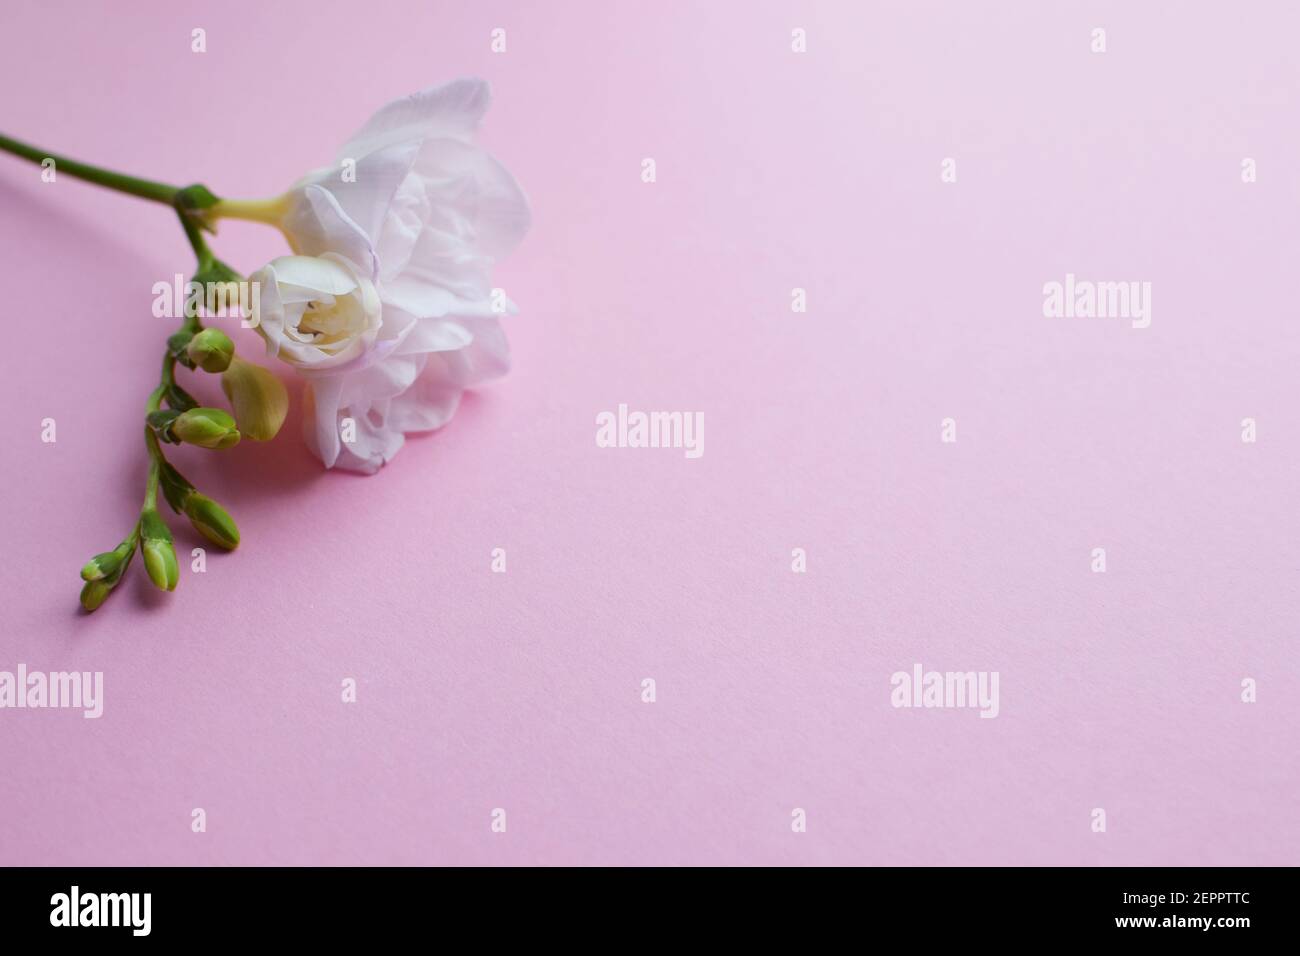 Floral background. Beautiful white freesia flowers and buds on a pink background. Minimalism. Flat lay, top view. Place for text. Stock Photo